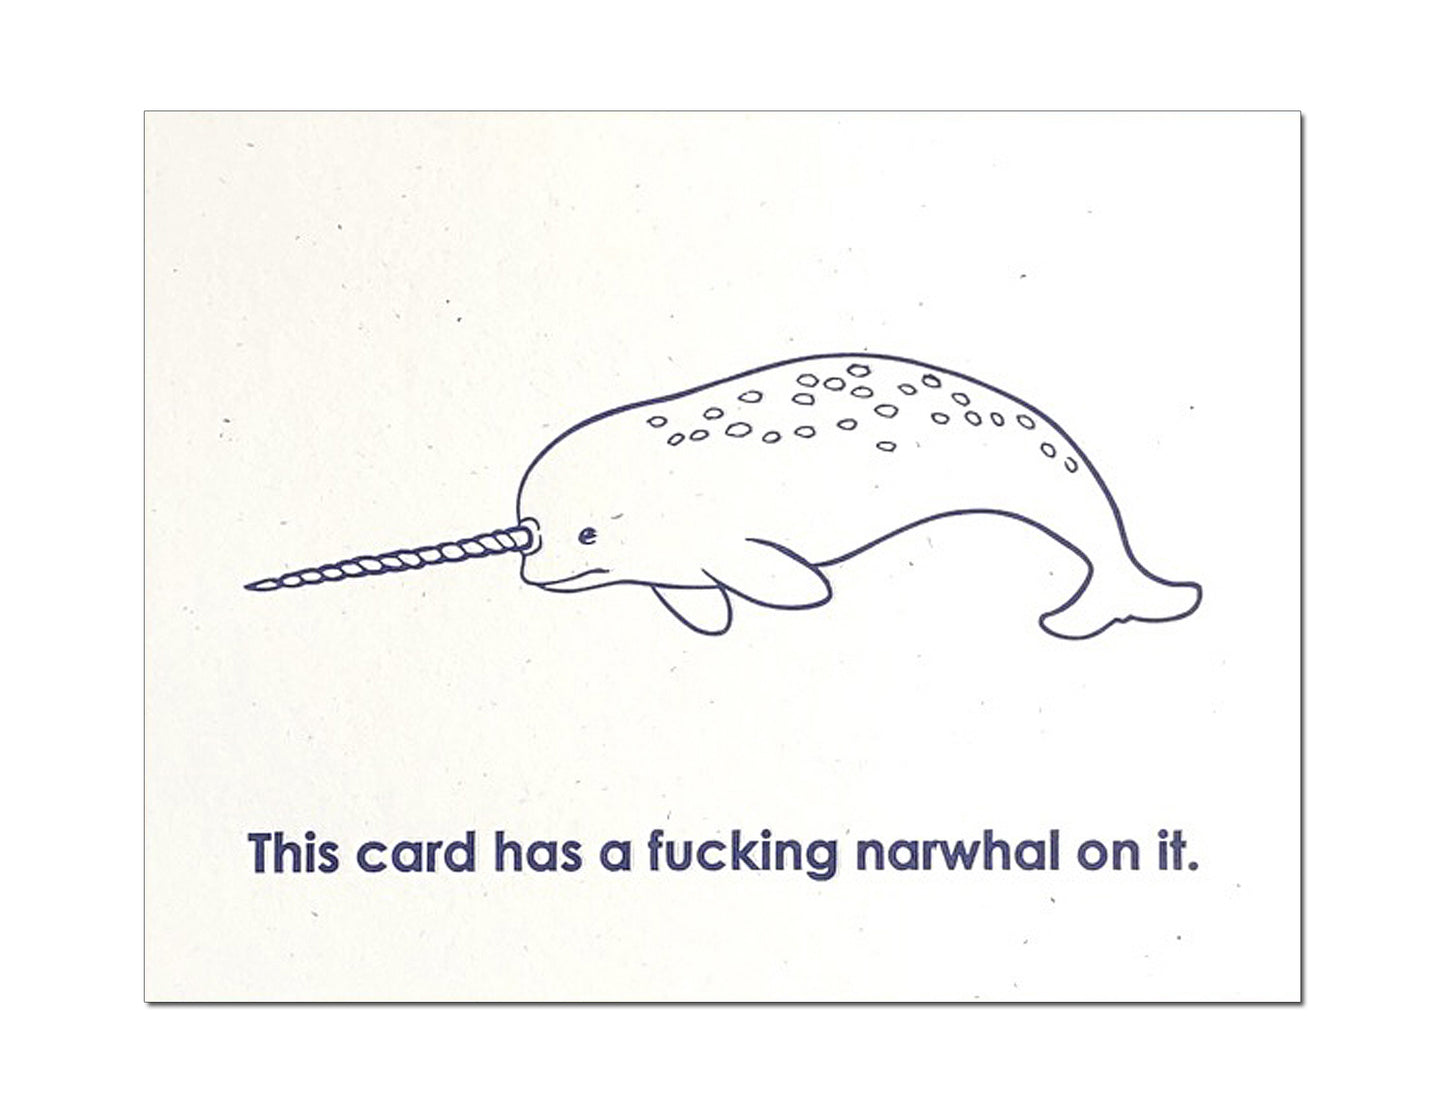 A Fucking Narwhal On It